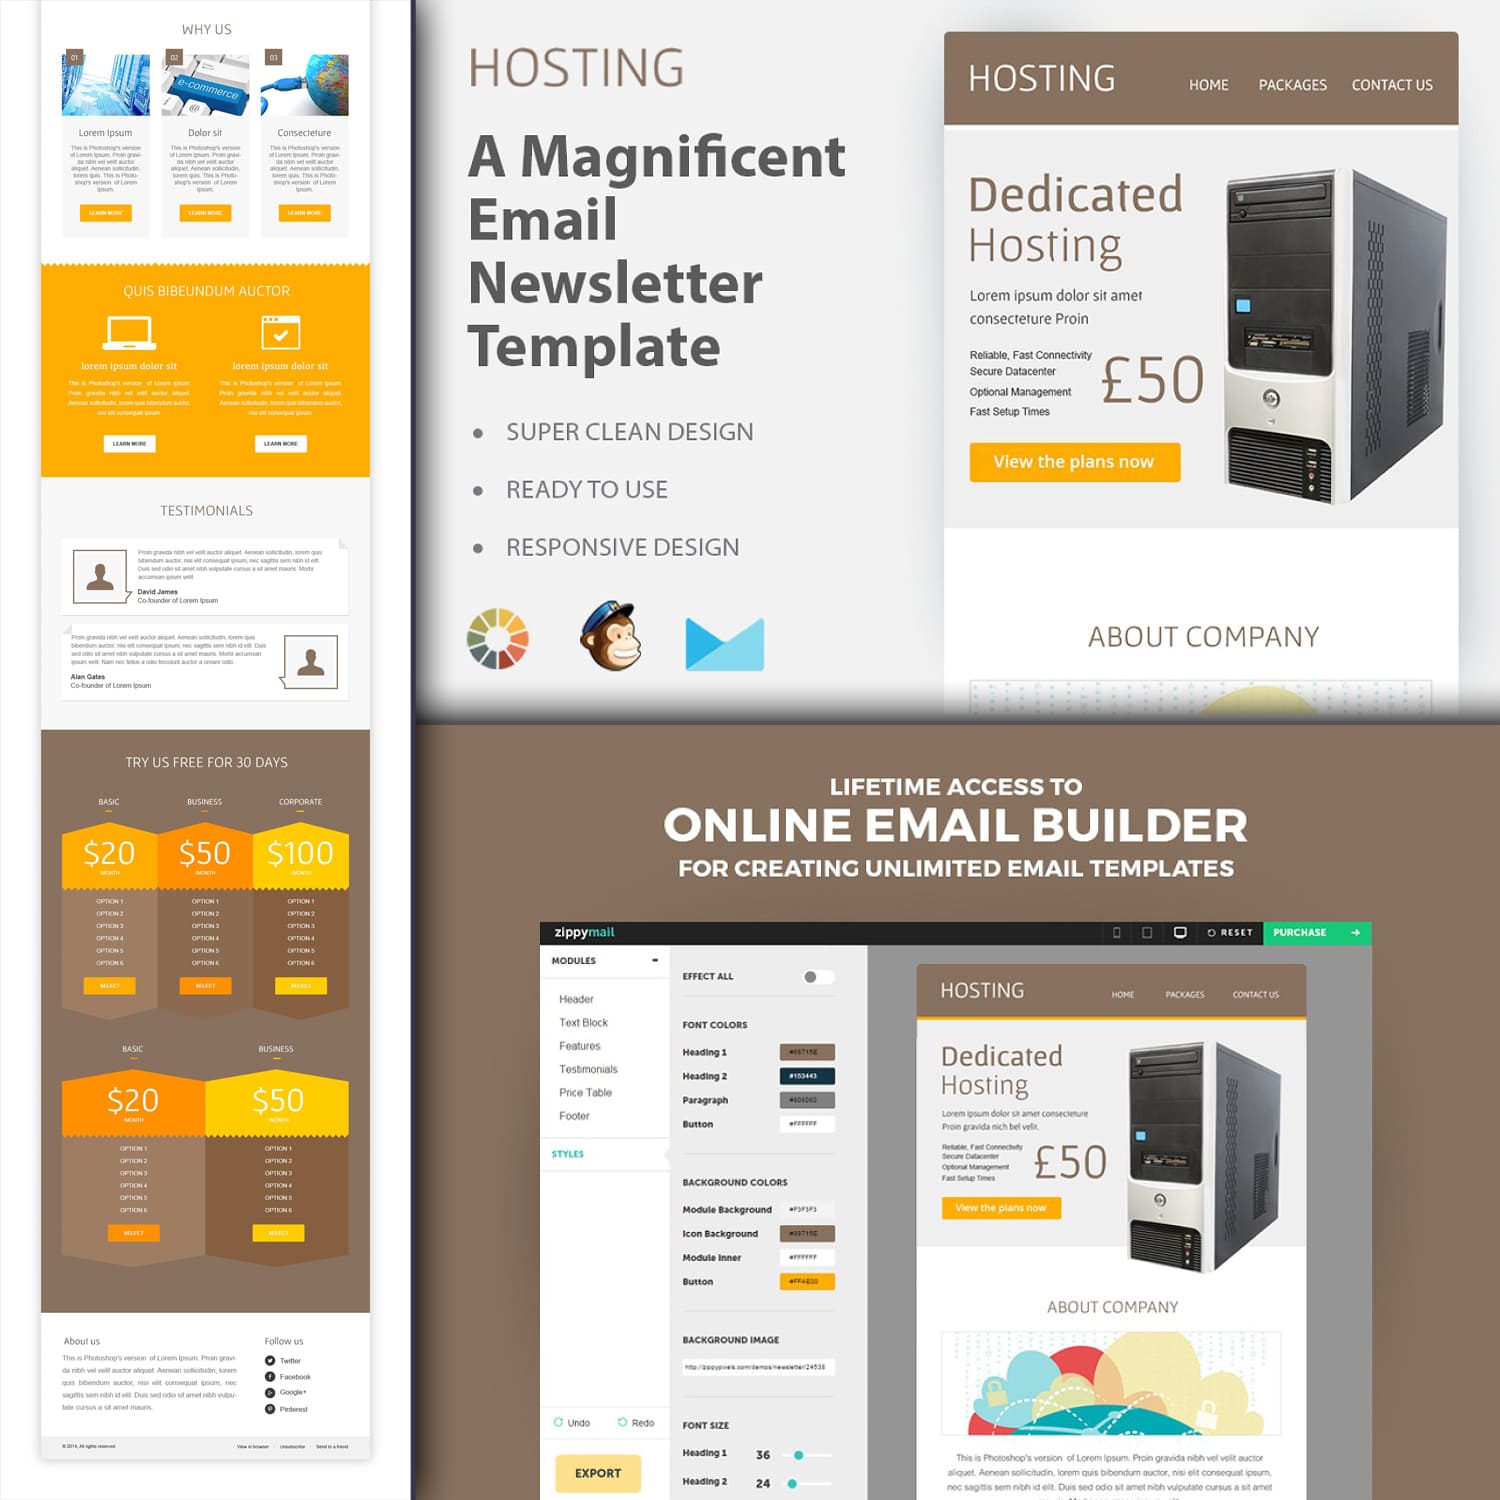 Hosting-Responsive Email Template Cover.